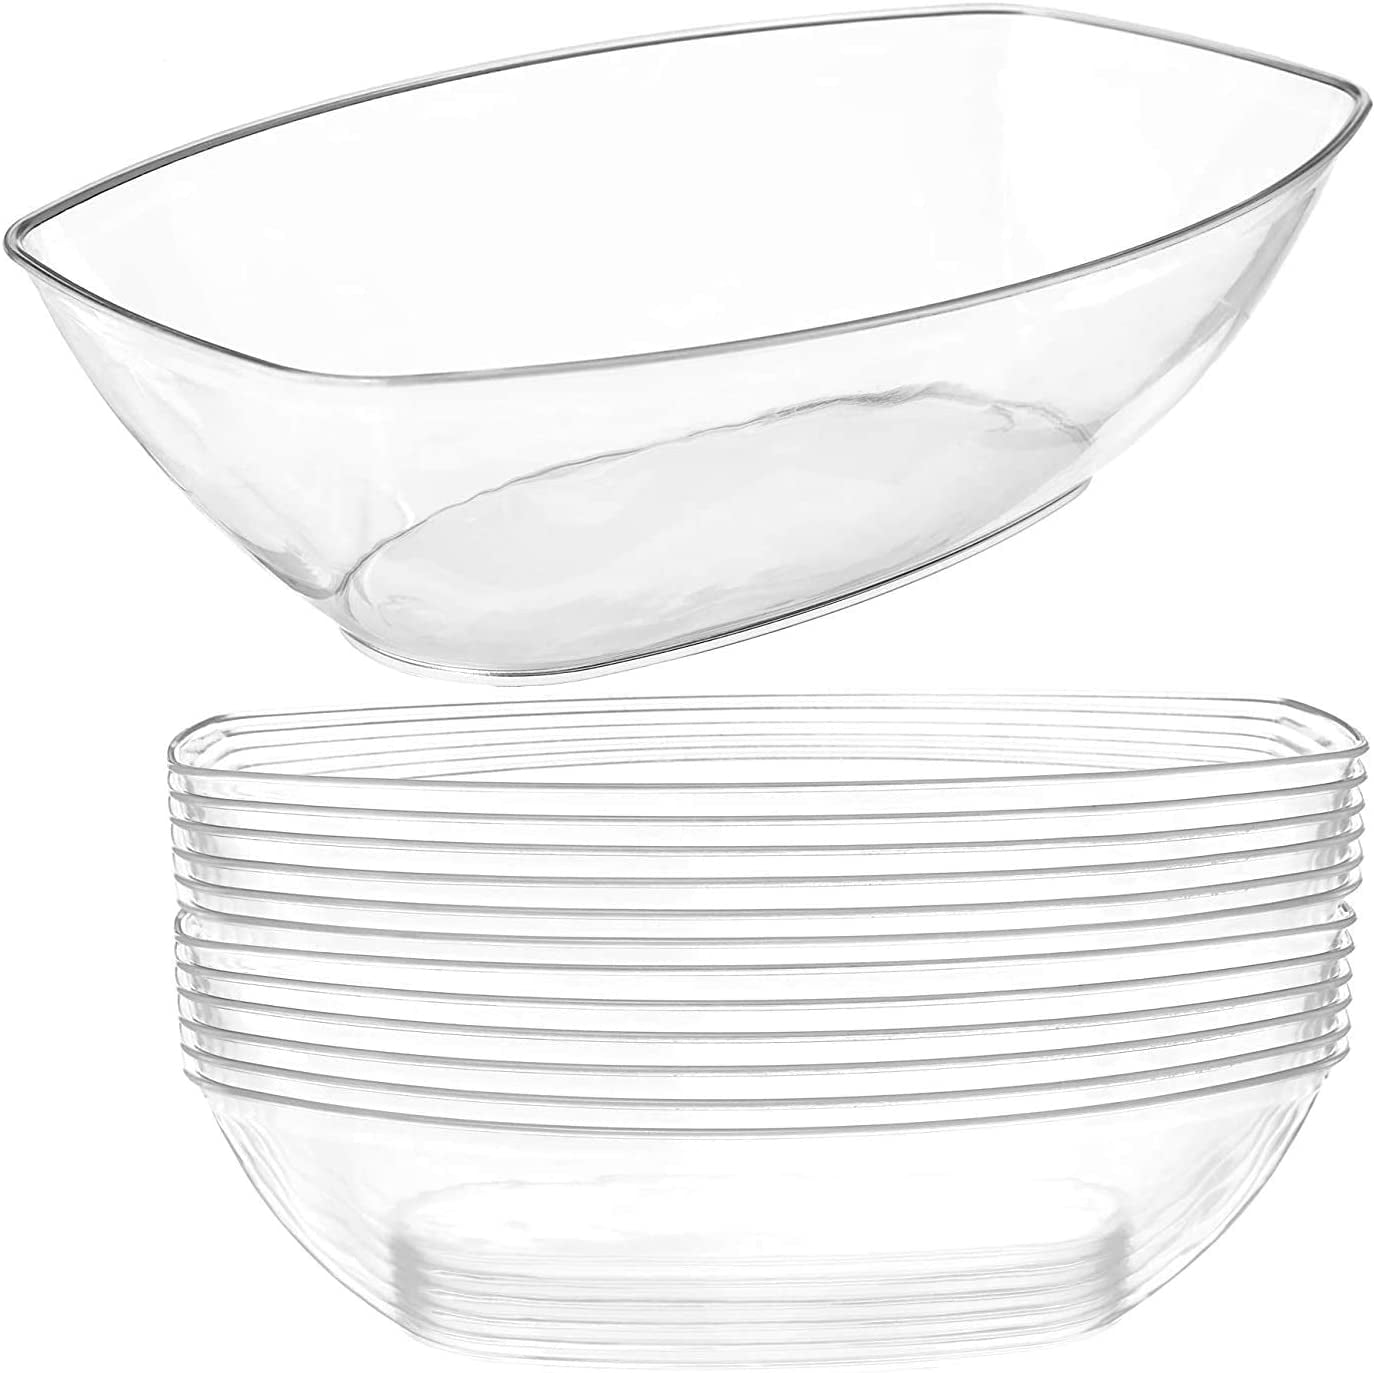 64 oz Platter Clear Container, 1 - King Soopers